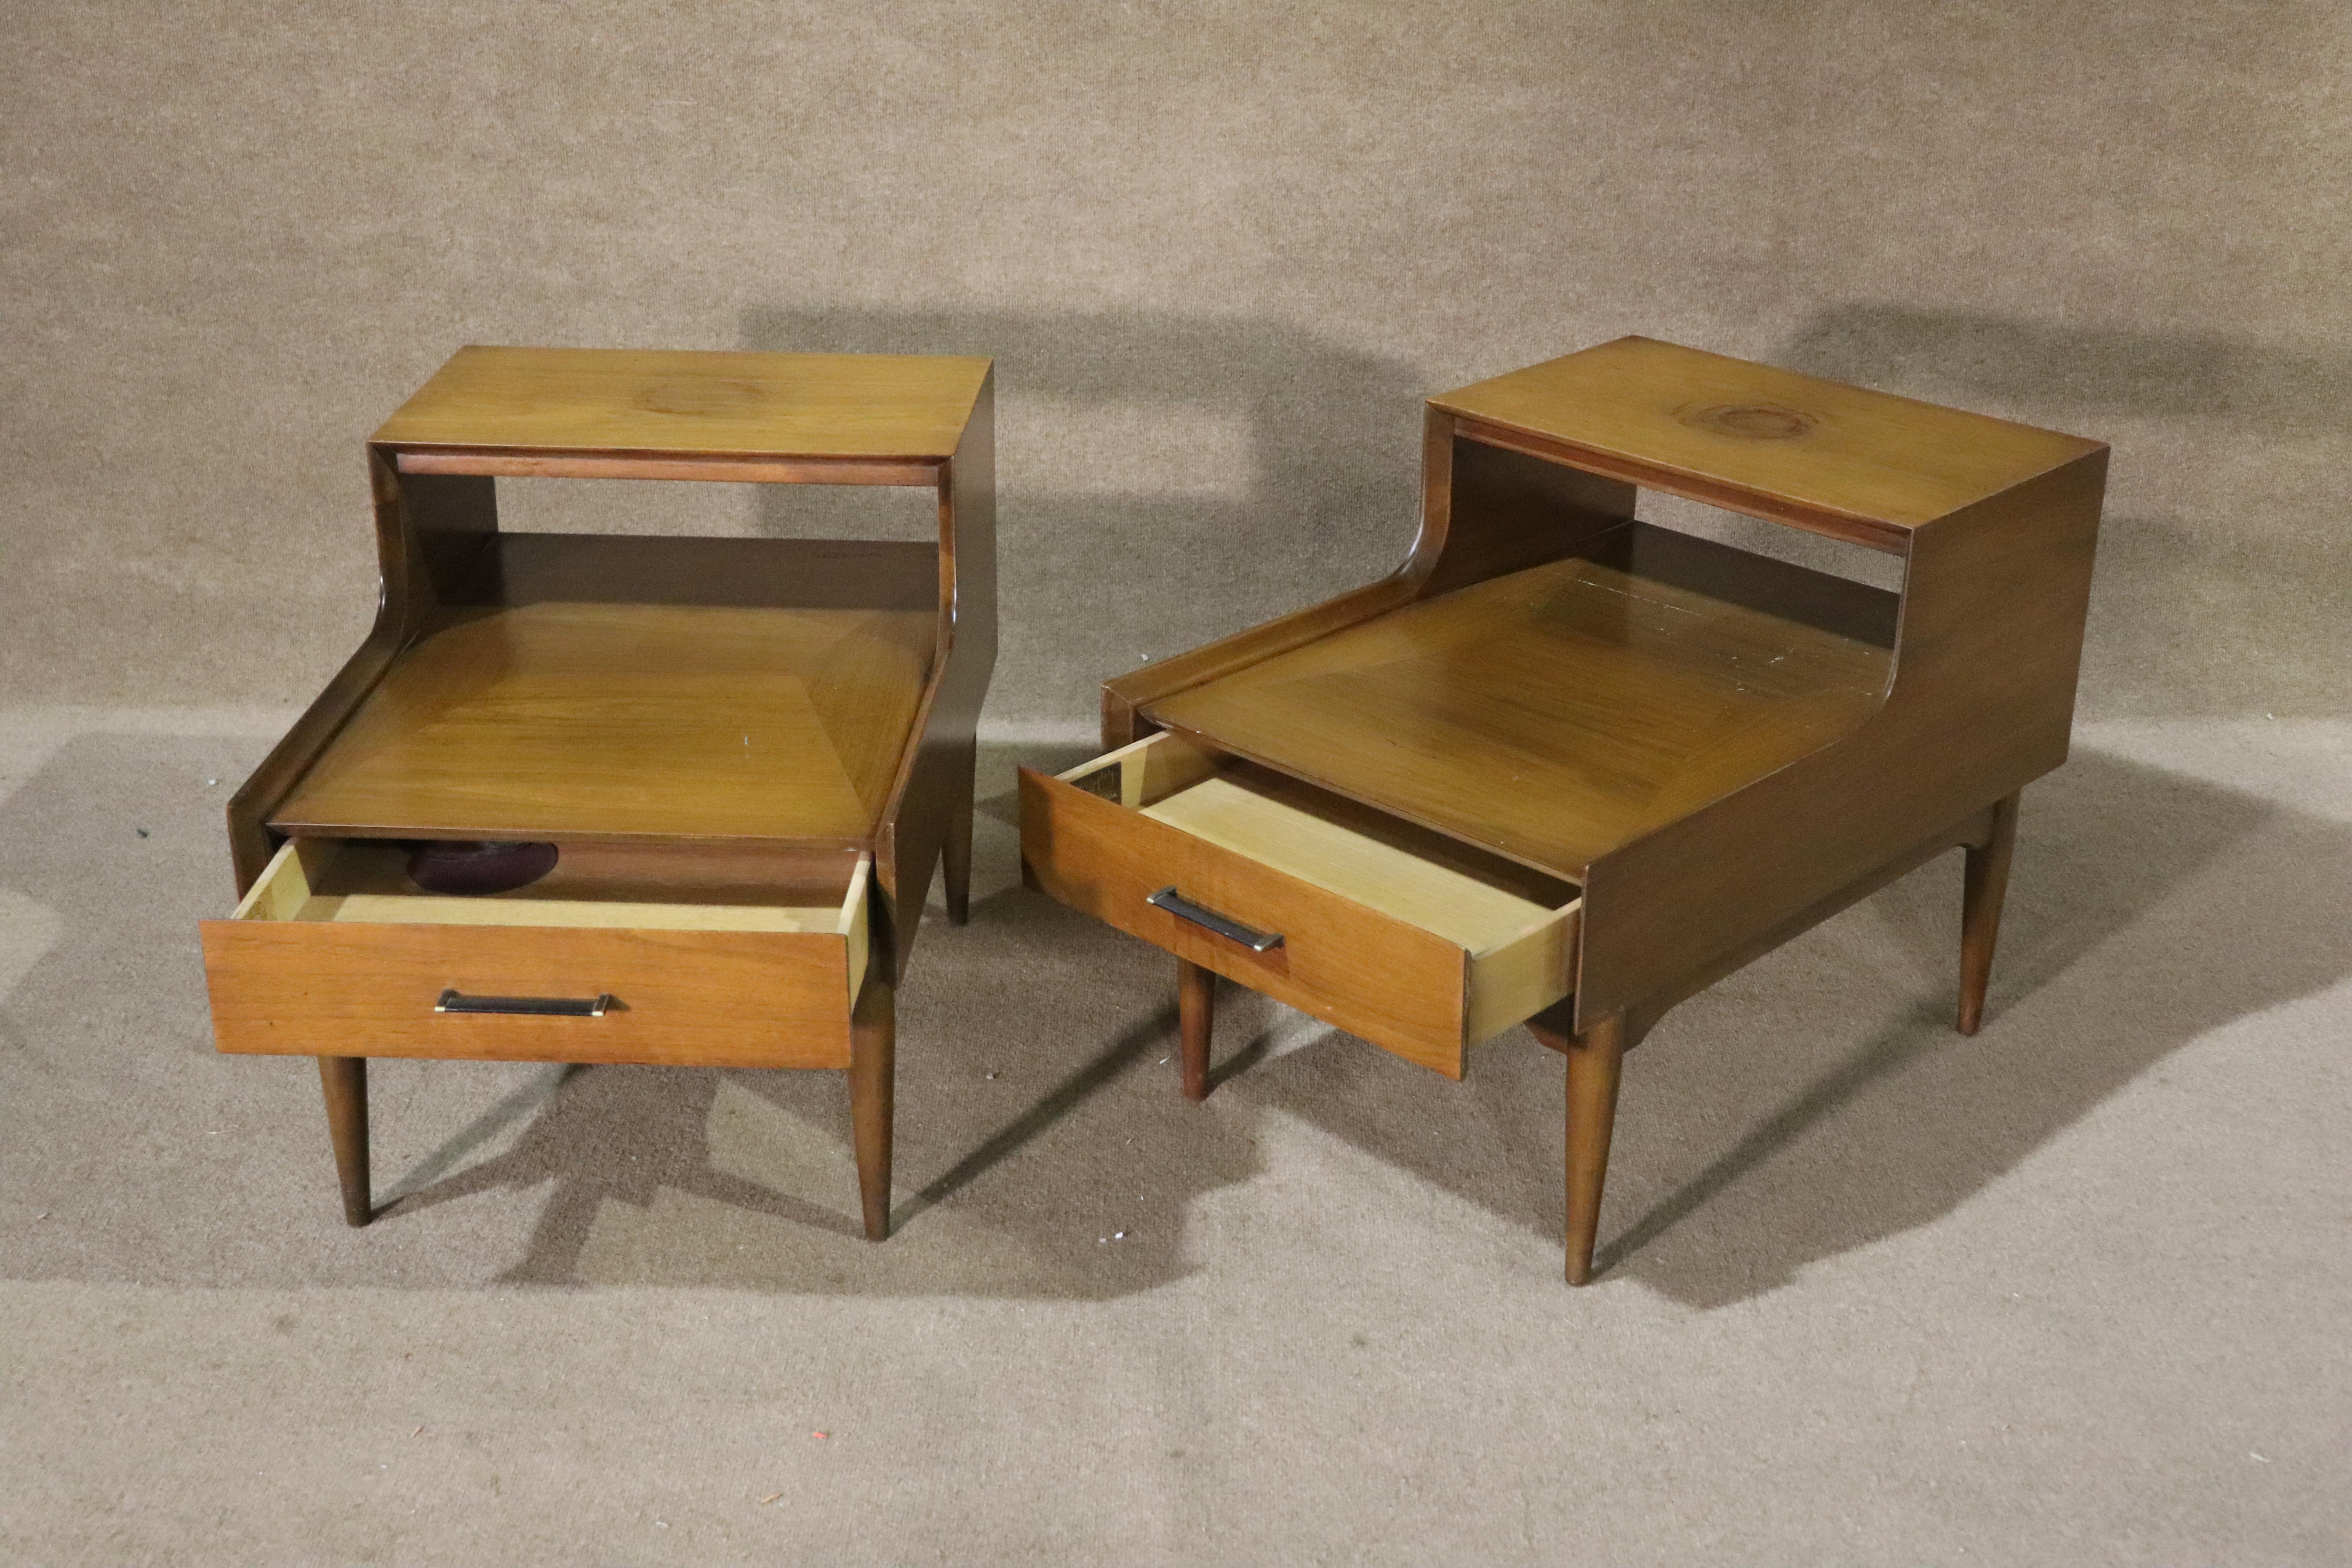 Mid-century modern side tables made by Ramseur Furniture. Tiered tables with drawer storage.
Please confirm location NY or NJ